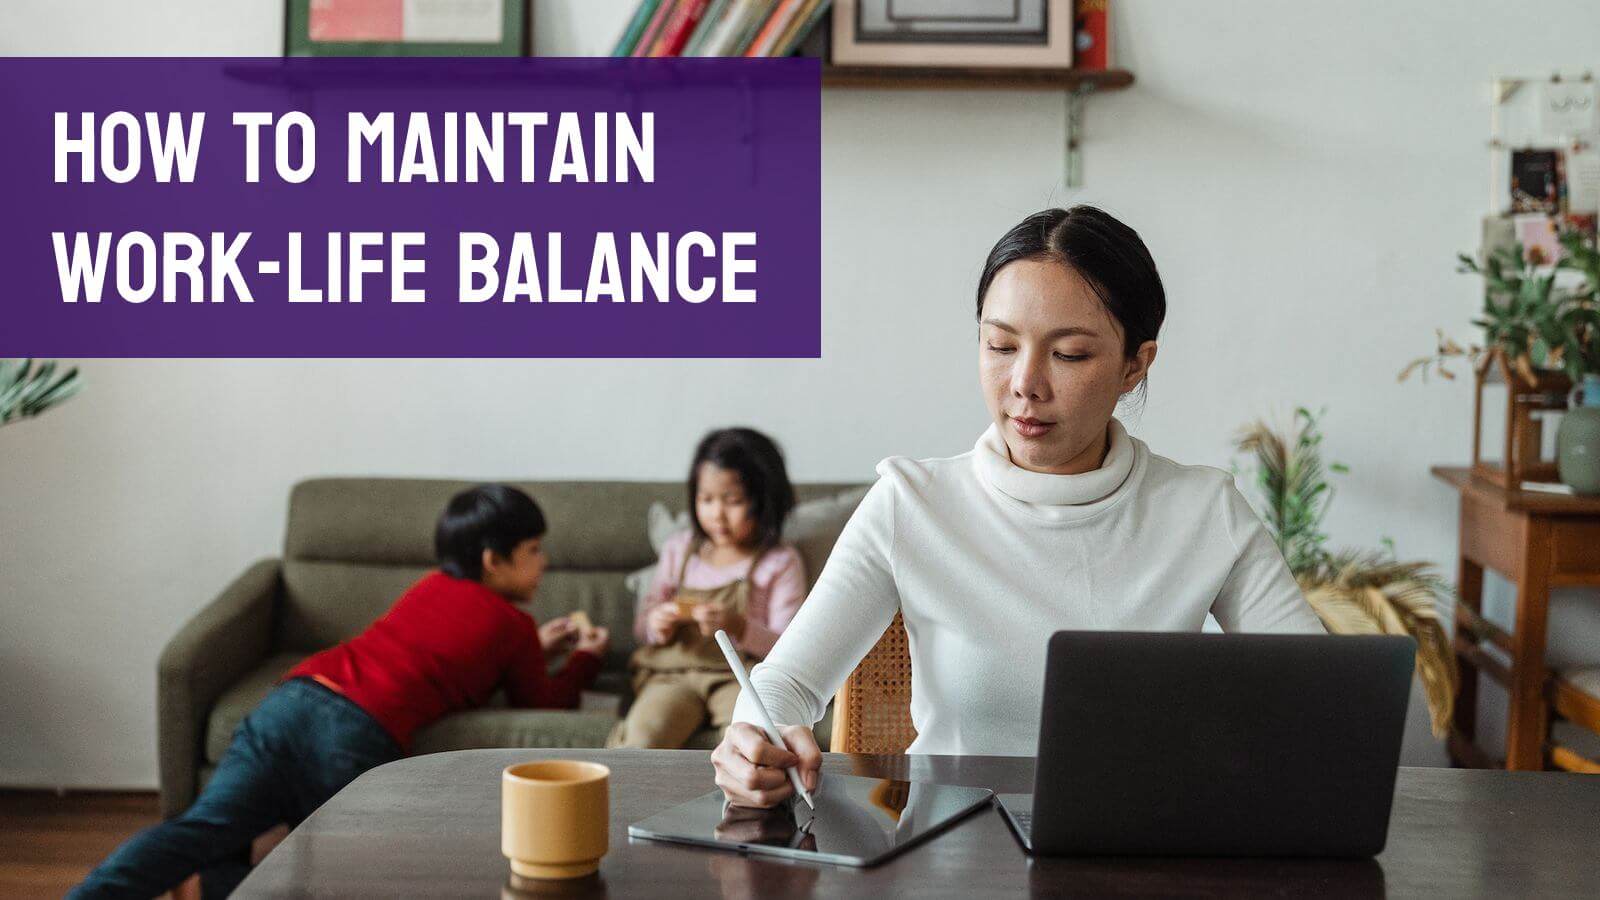 Work from home is great when managed correctly. How to balance work and life?